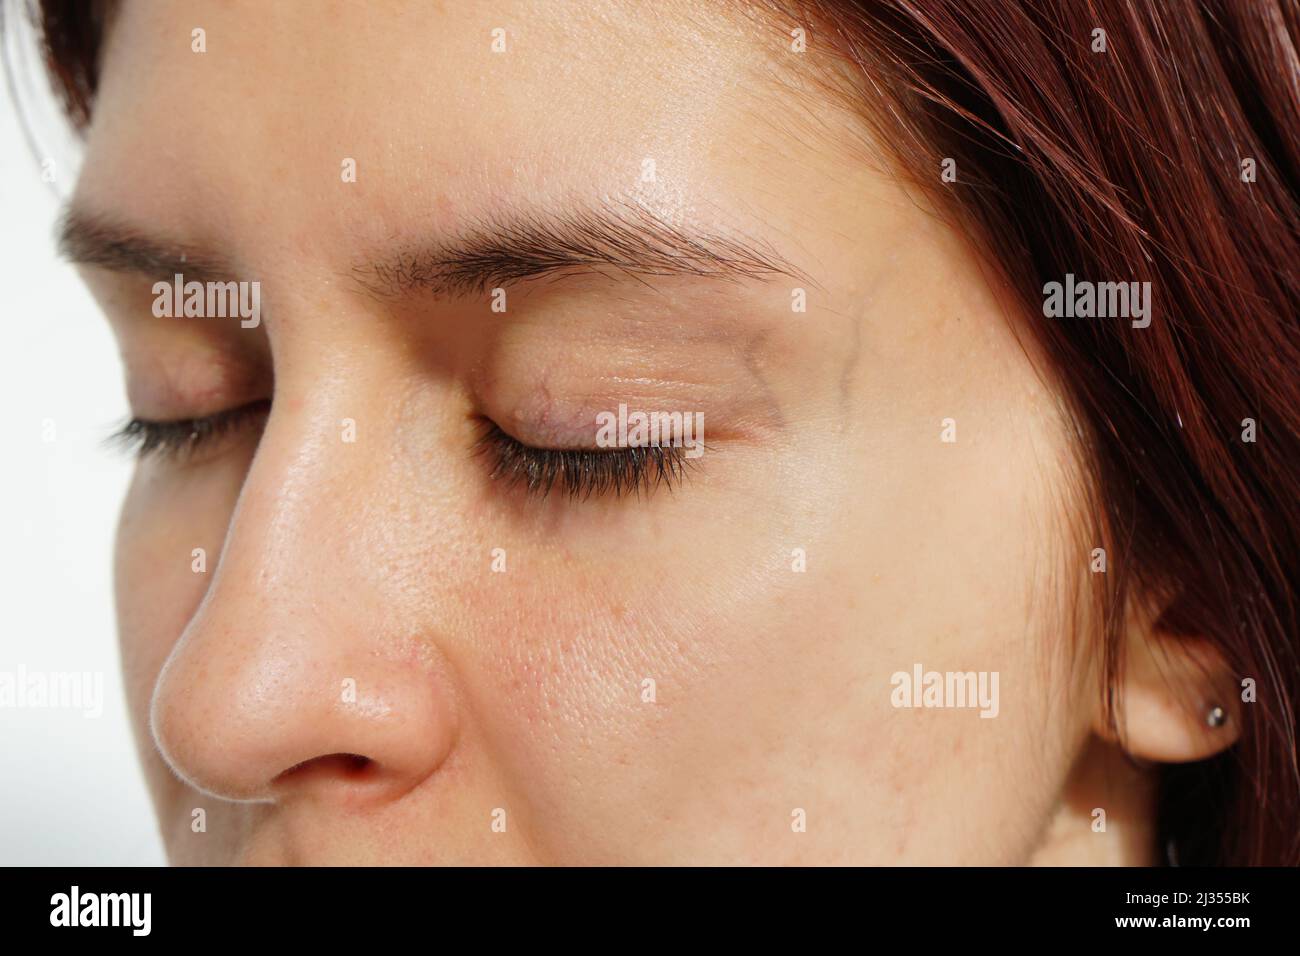 Woman before laser treatment with spider veins and broken capillaries around eyes. Stock Photo